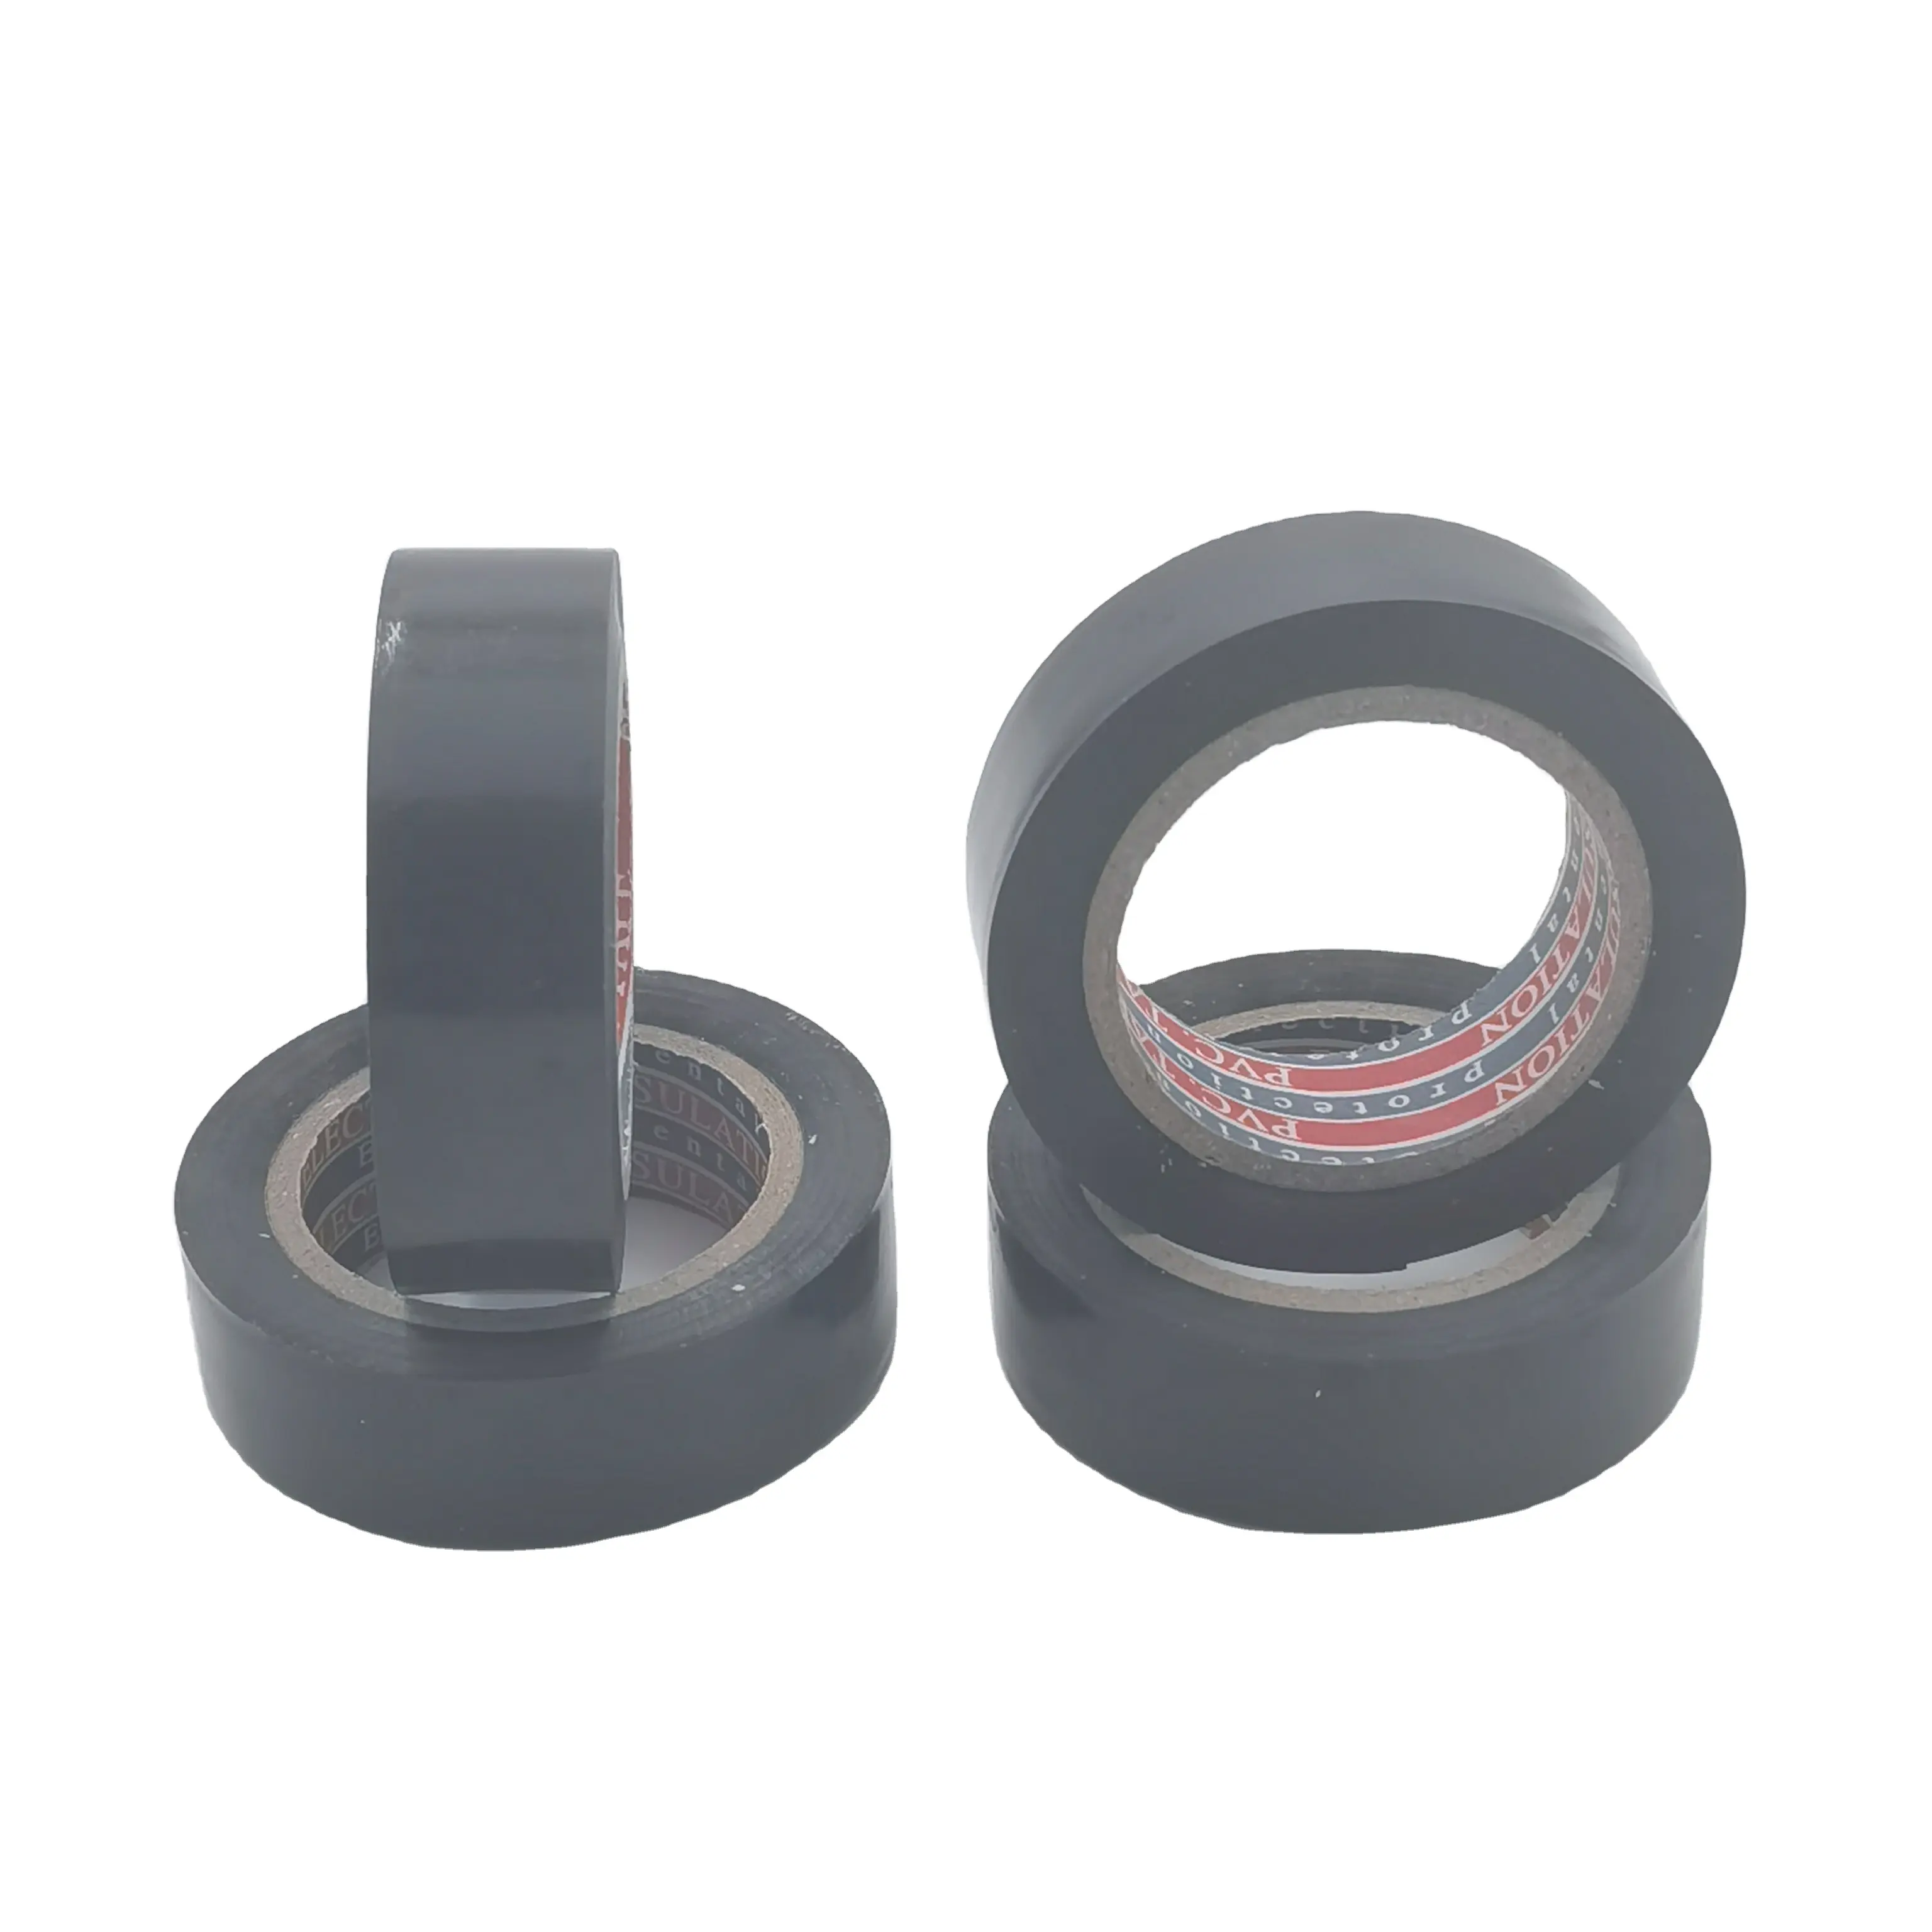 Hot sale china factory pvc insulation electrical tape cheap price